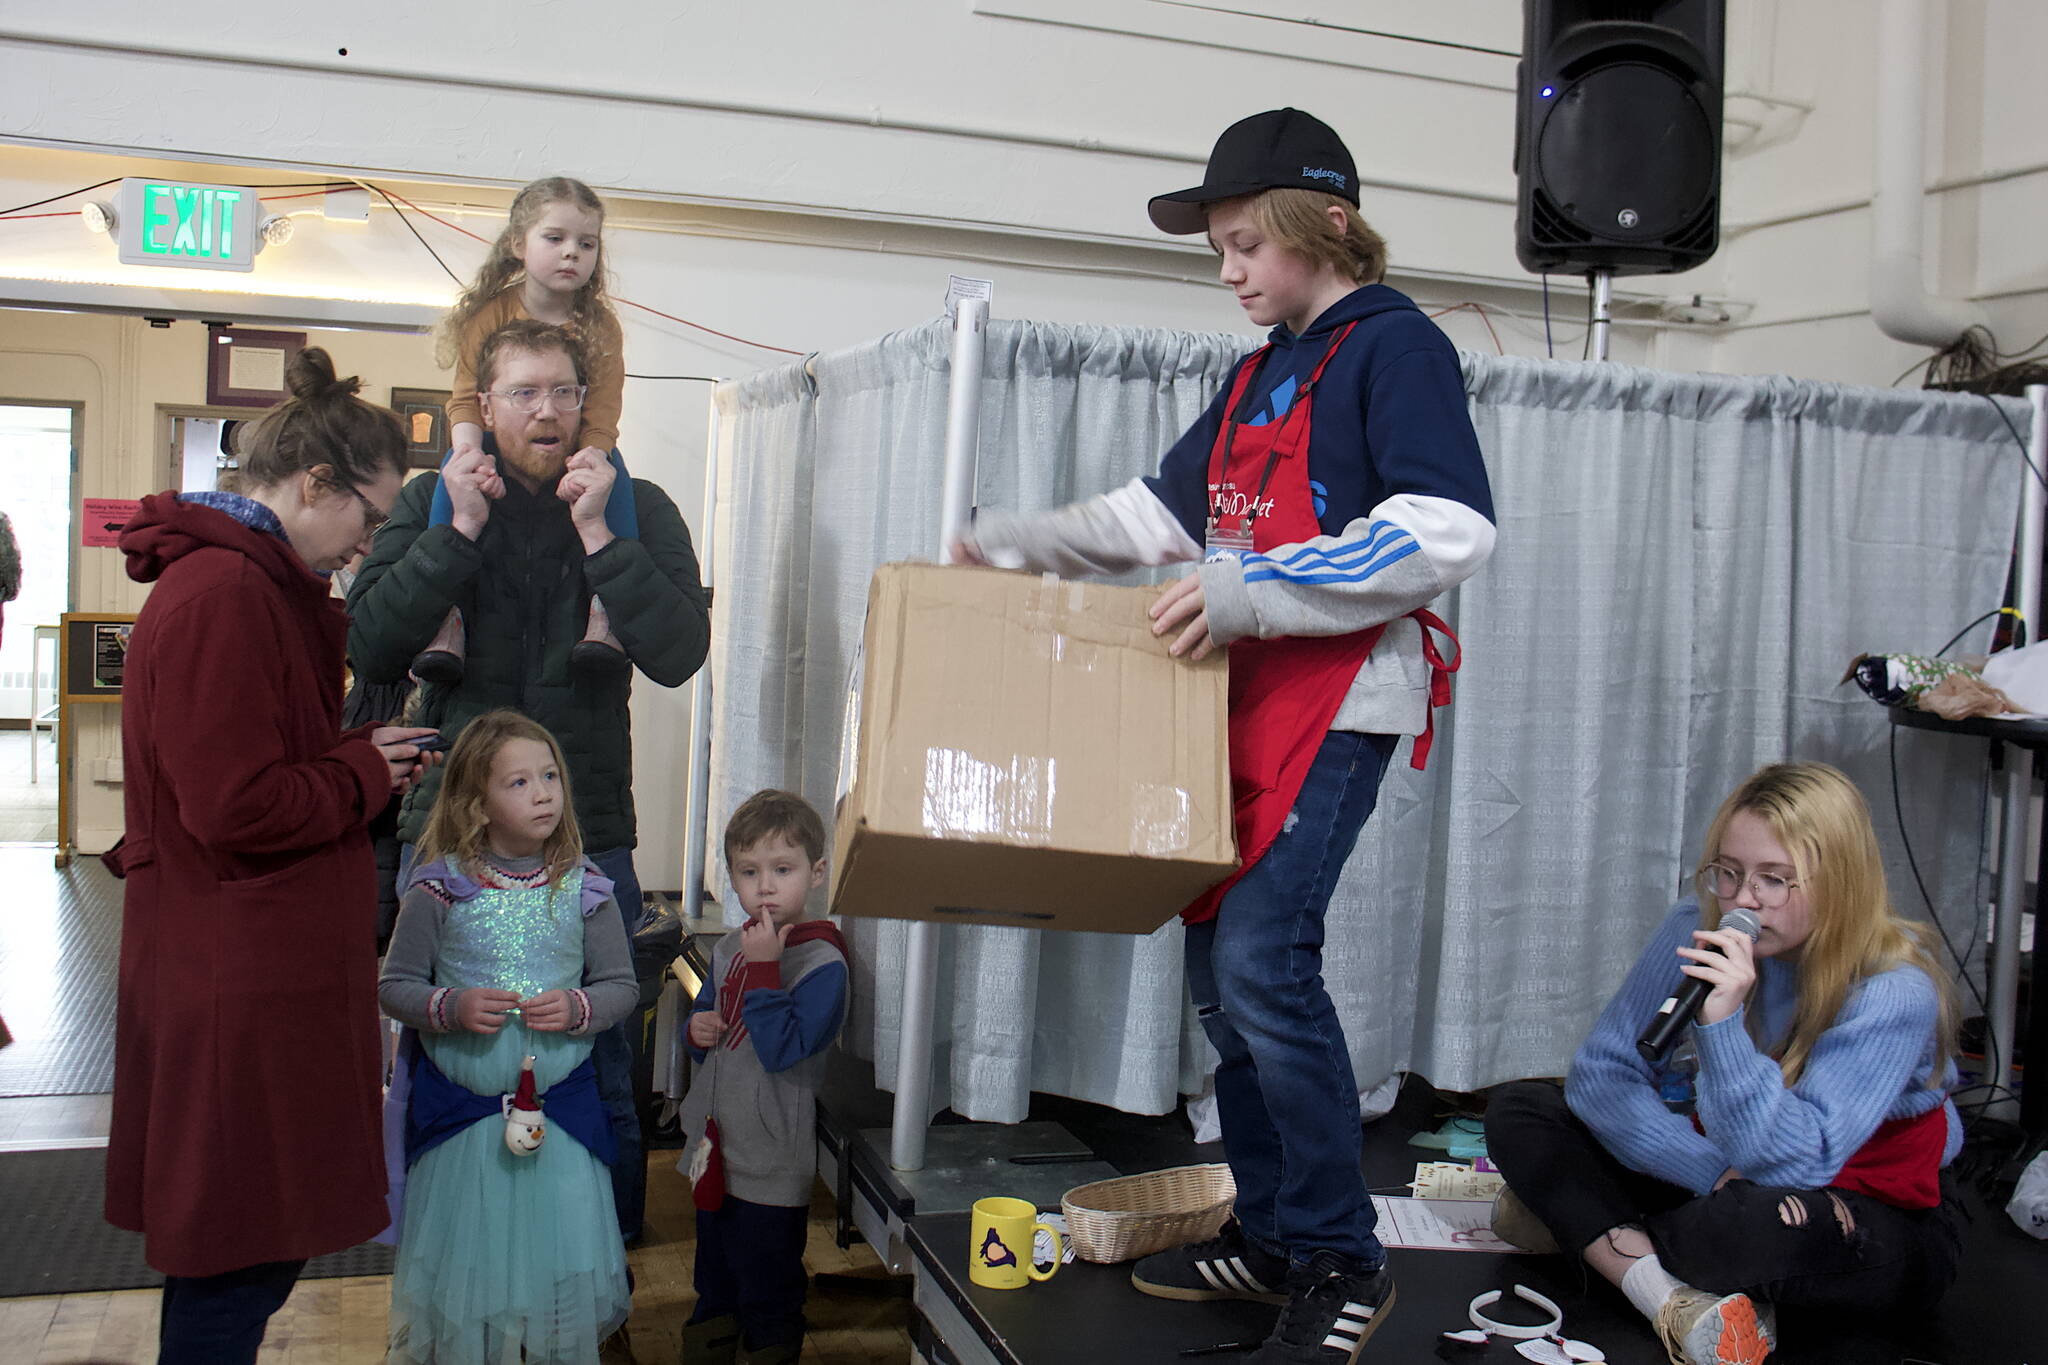 Angus Andrews, 13, pulls a ticket slip from a box during a prize drawing at the Juneau Public Market on Saturday. He said he has been working at the market since the age of 5 when he helped Santa distribute presents. (Mark Sabbatini / Juneau Empire)